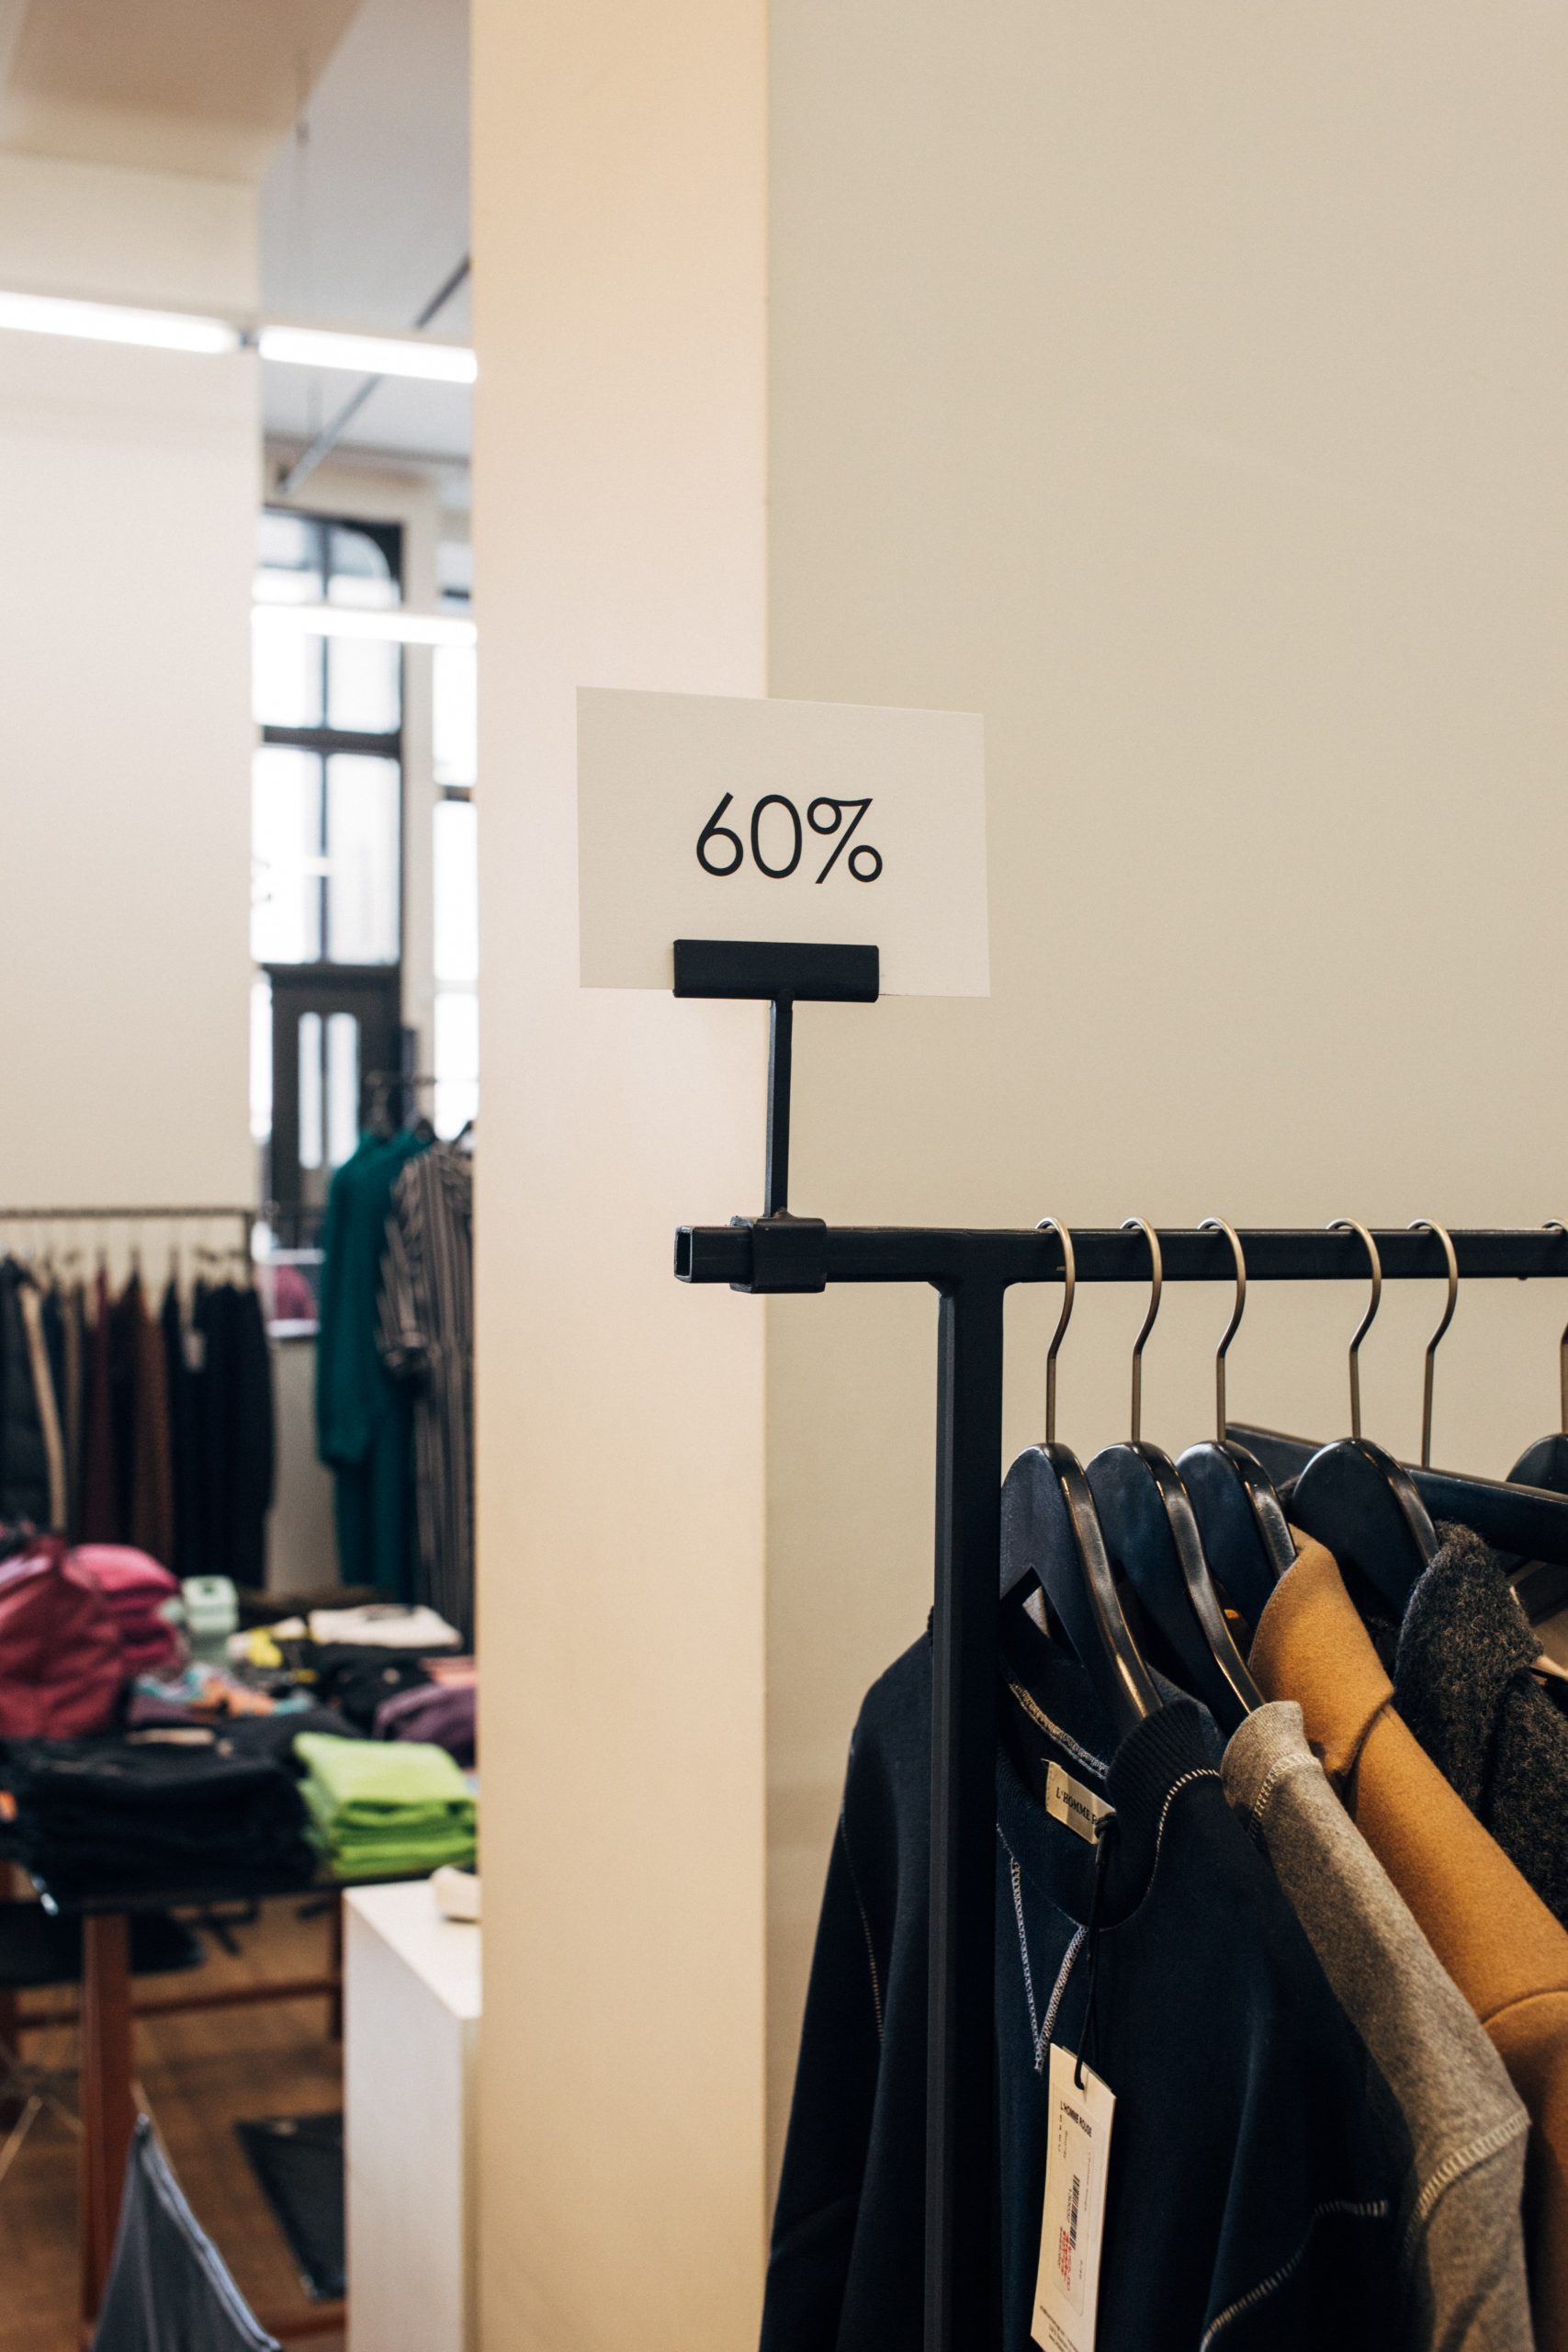 Photo of a rack of clothes labeled 60% off.